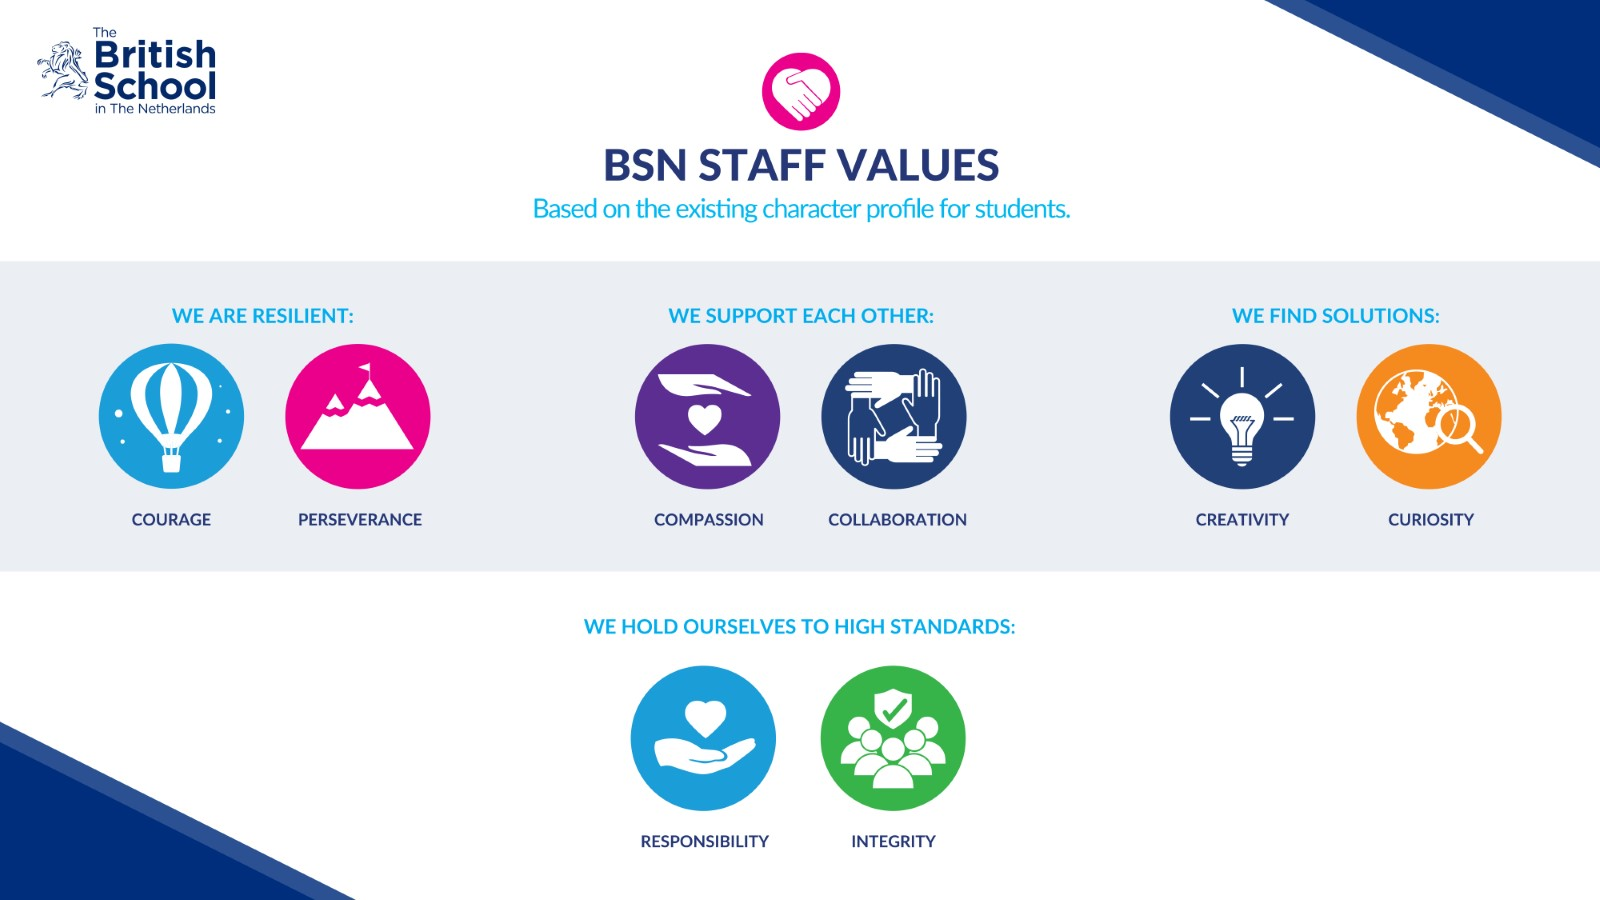 list of characteristics that make up the bsn staff values. these are a shared ethos that unite and guide the staff of the british school in the netherlands, an international school in the hague. 